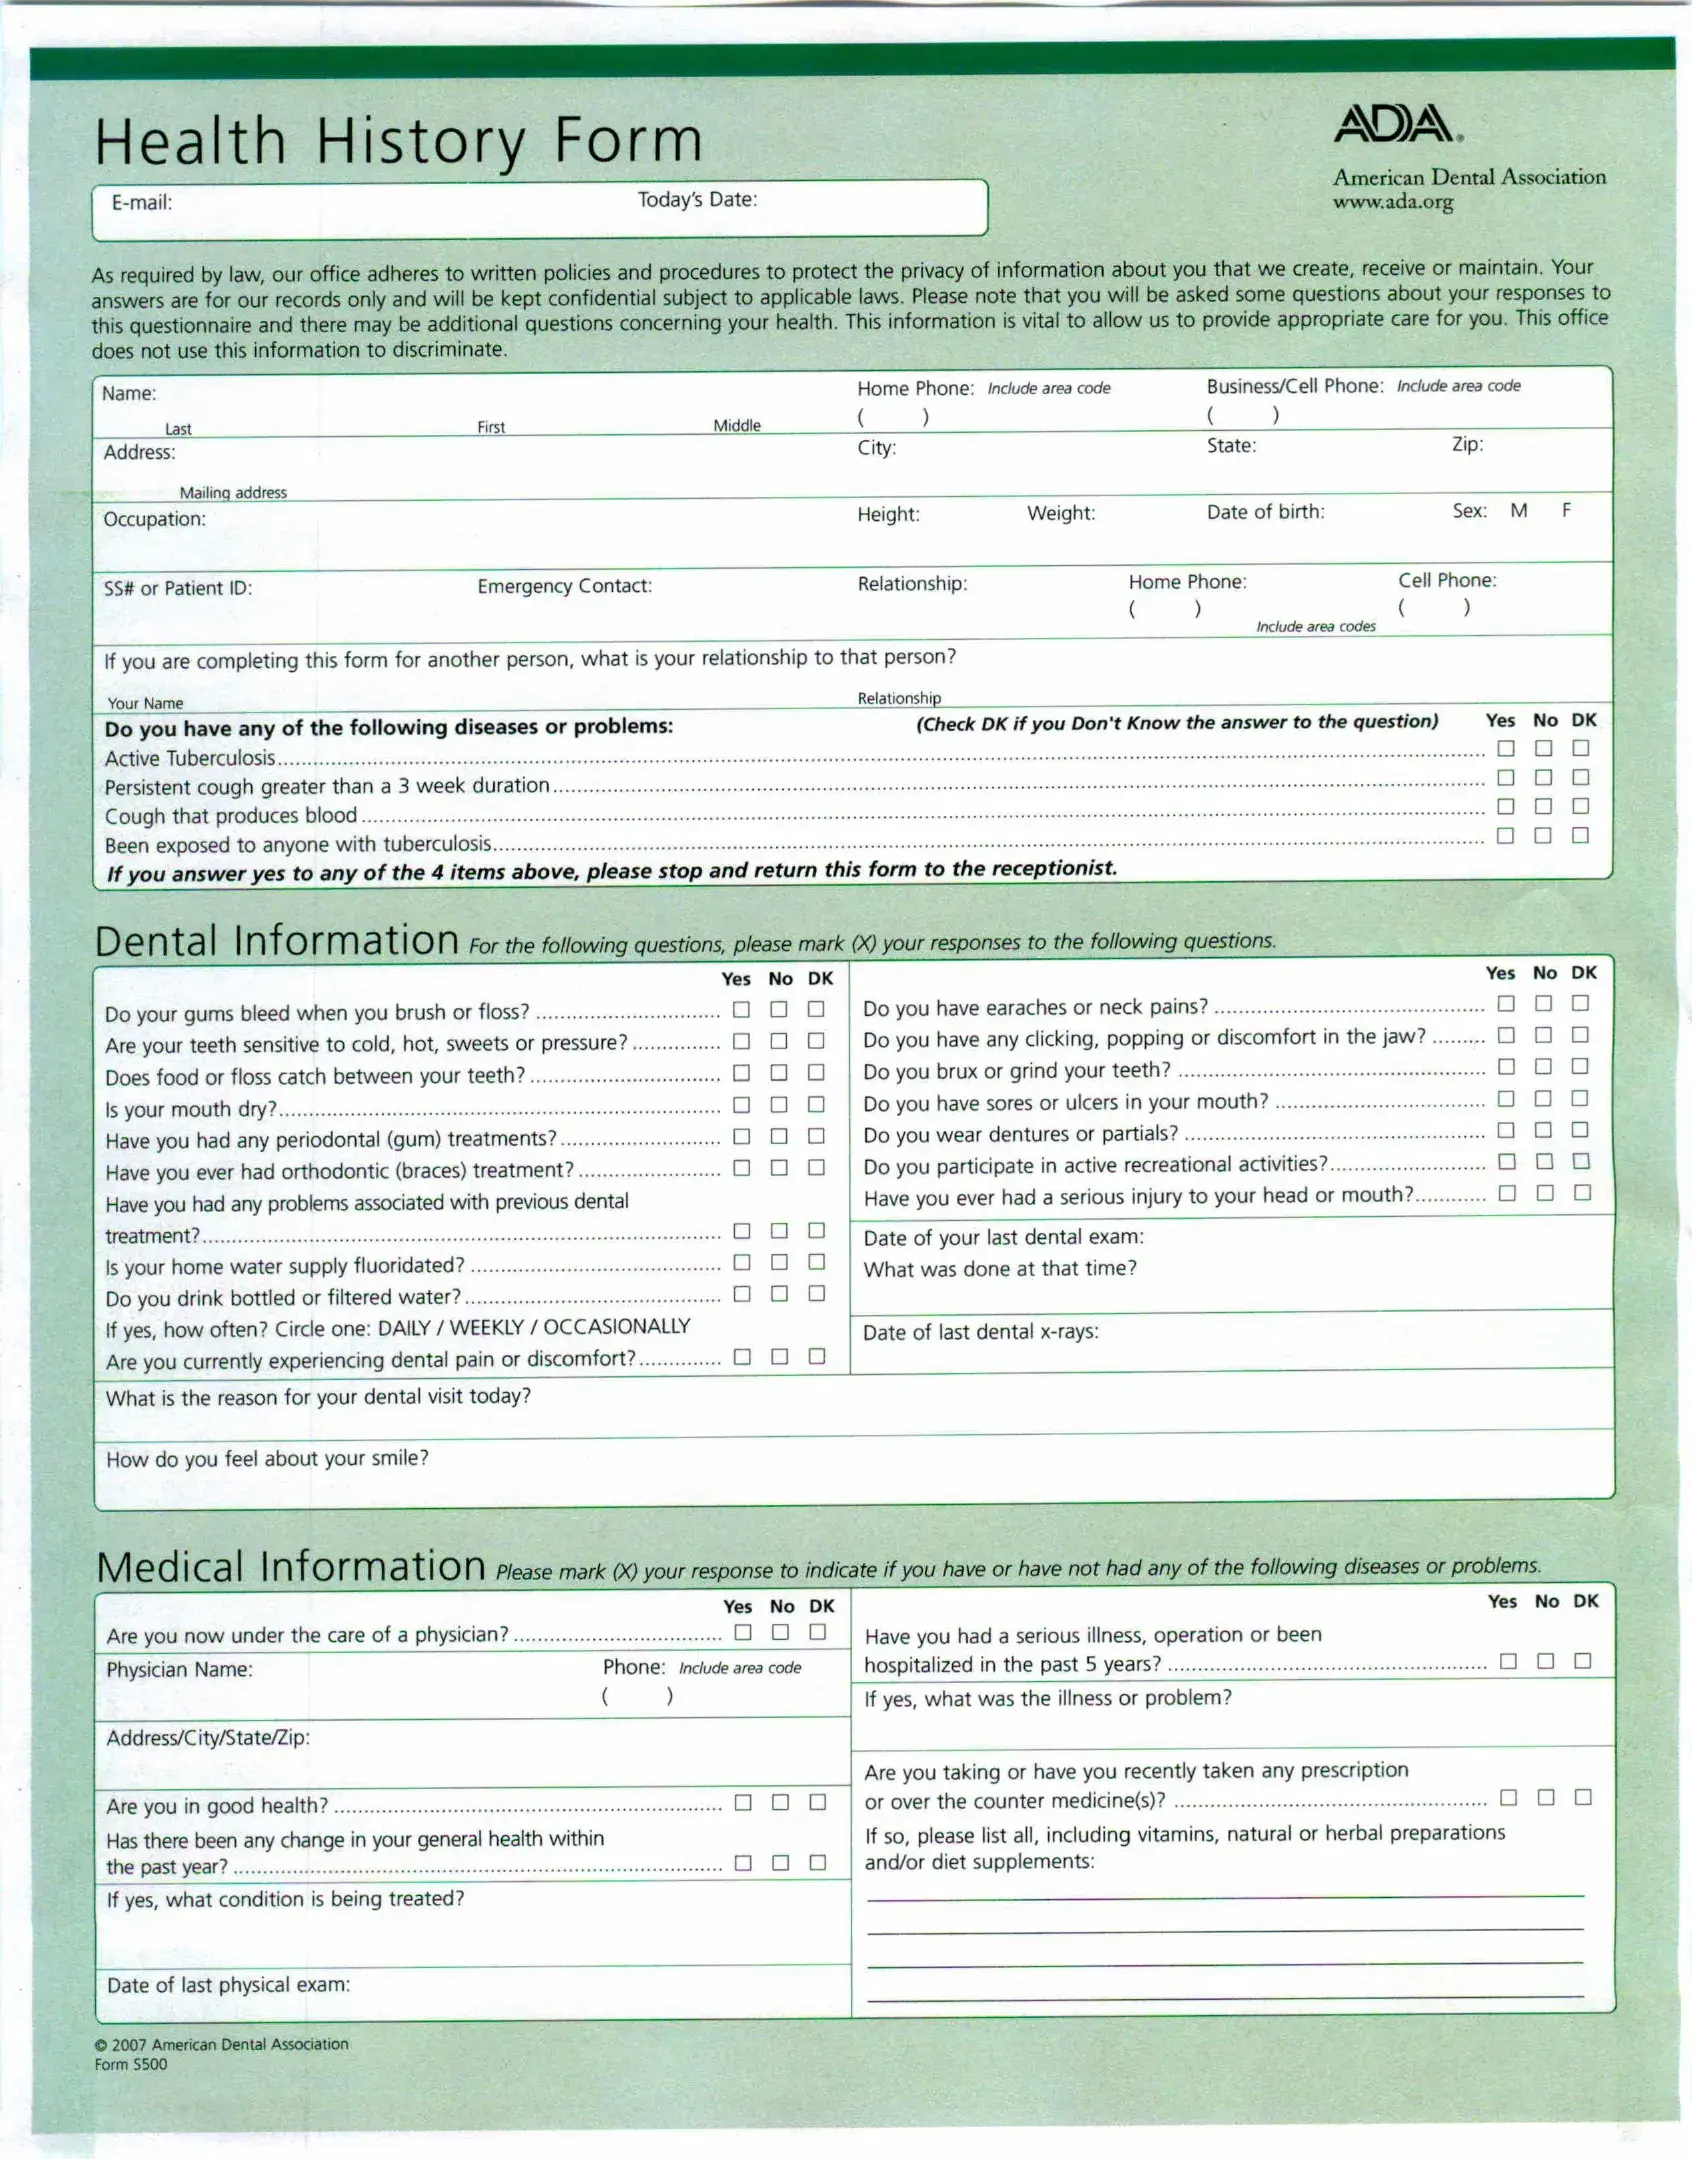 health-history-form-ada-fill-out-printable-pdf-forms-online